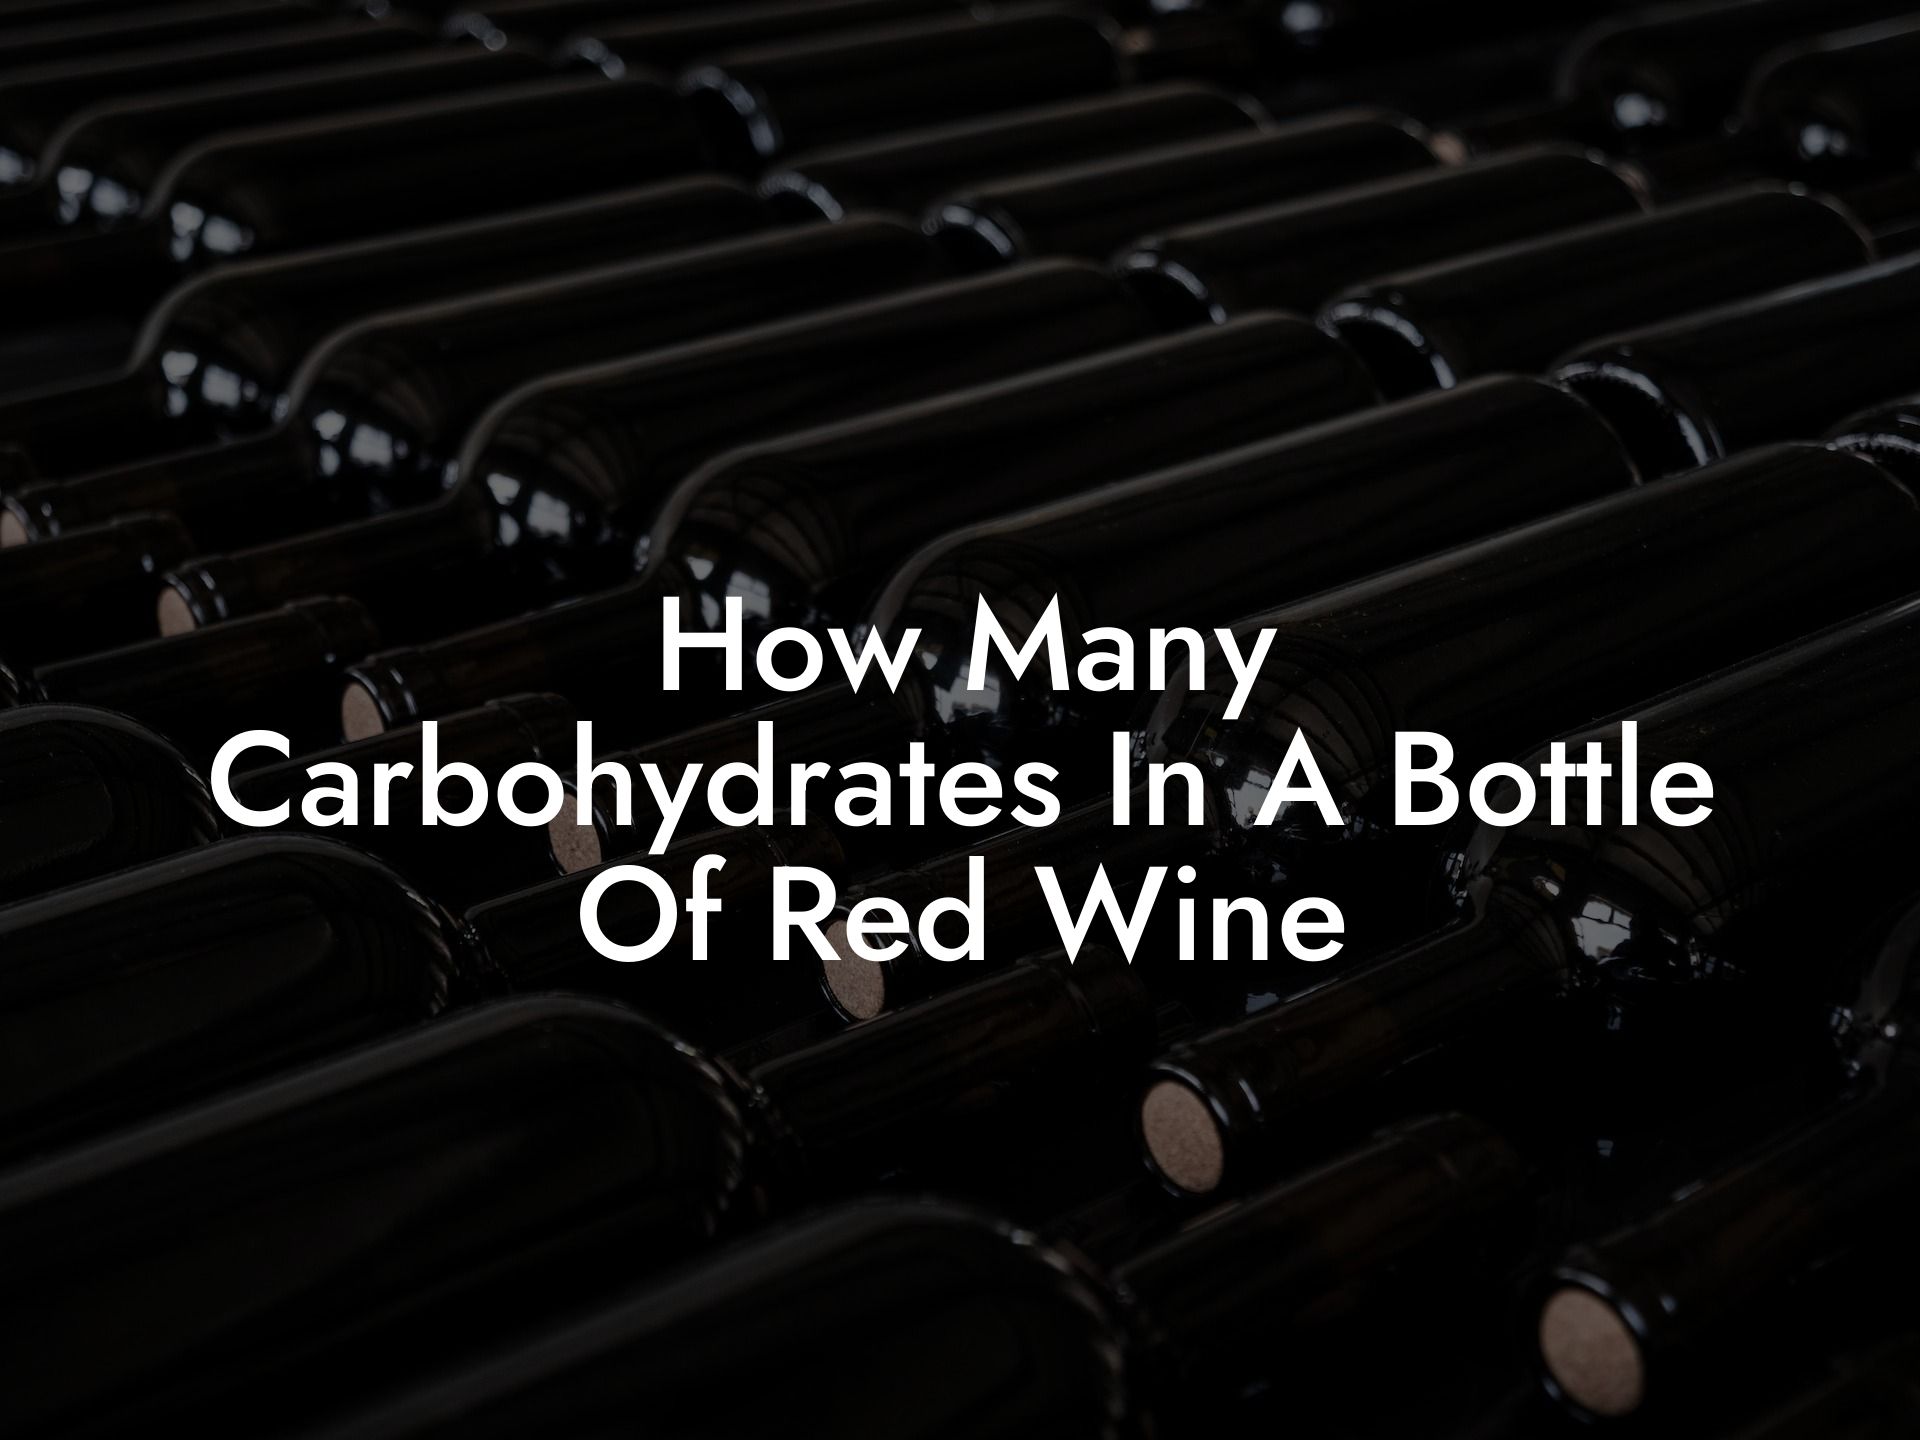 How Many Carbohydrates In A Bottle Of Red Wine